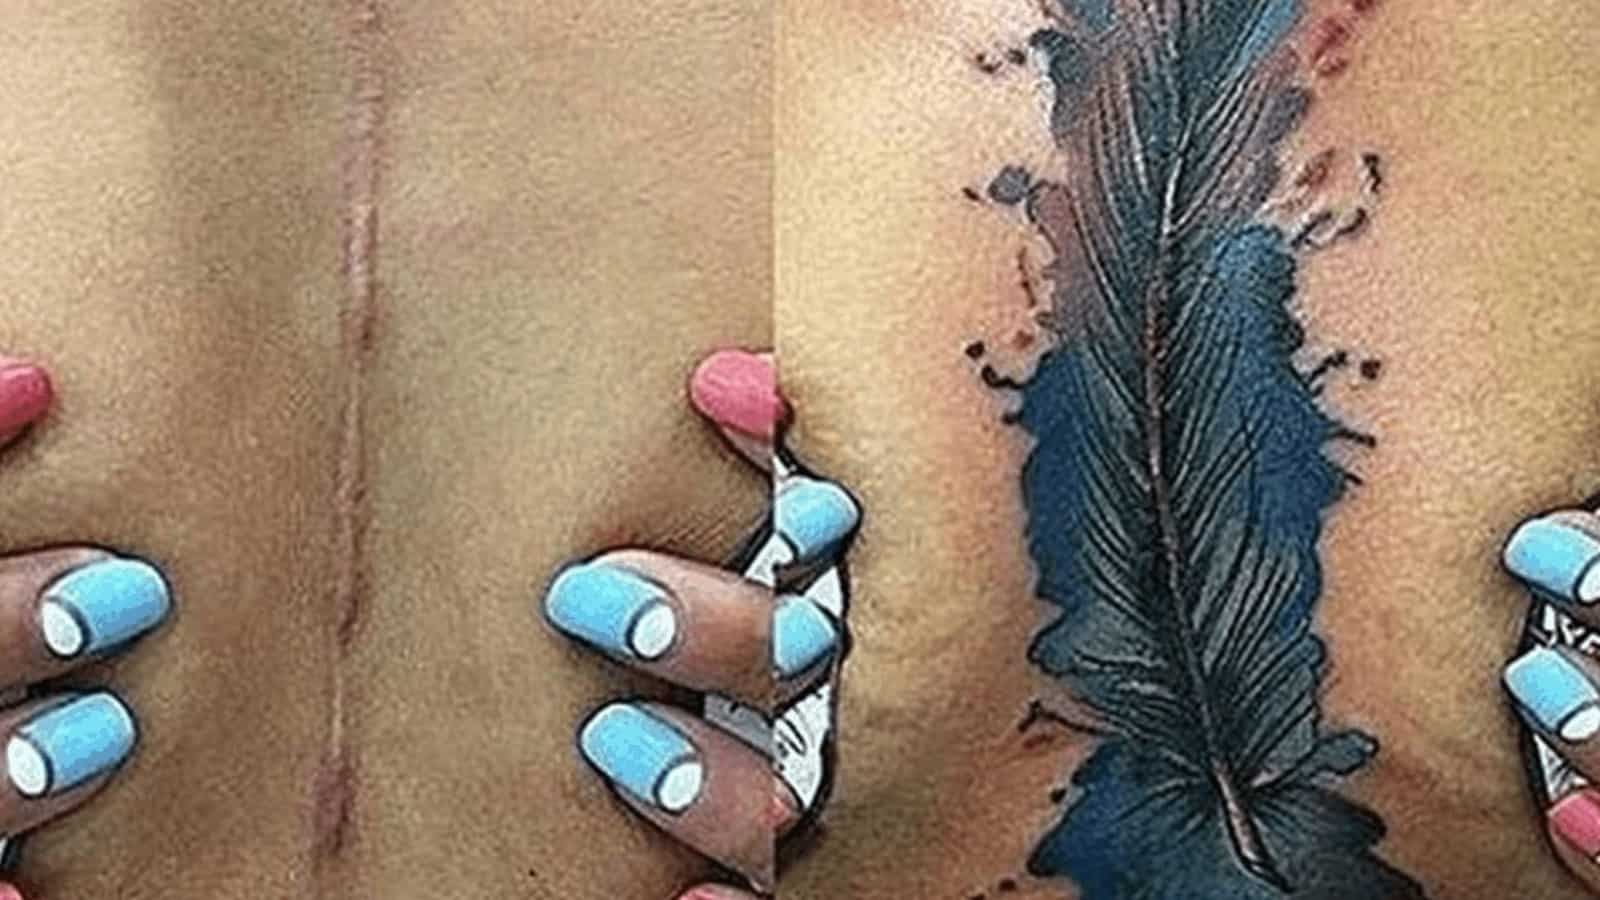 75 Amazing Scar Tattoo Cover-Ups | Power of Positivity